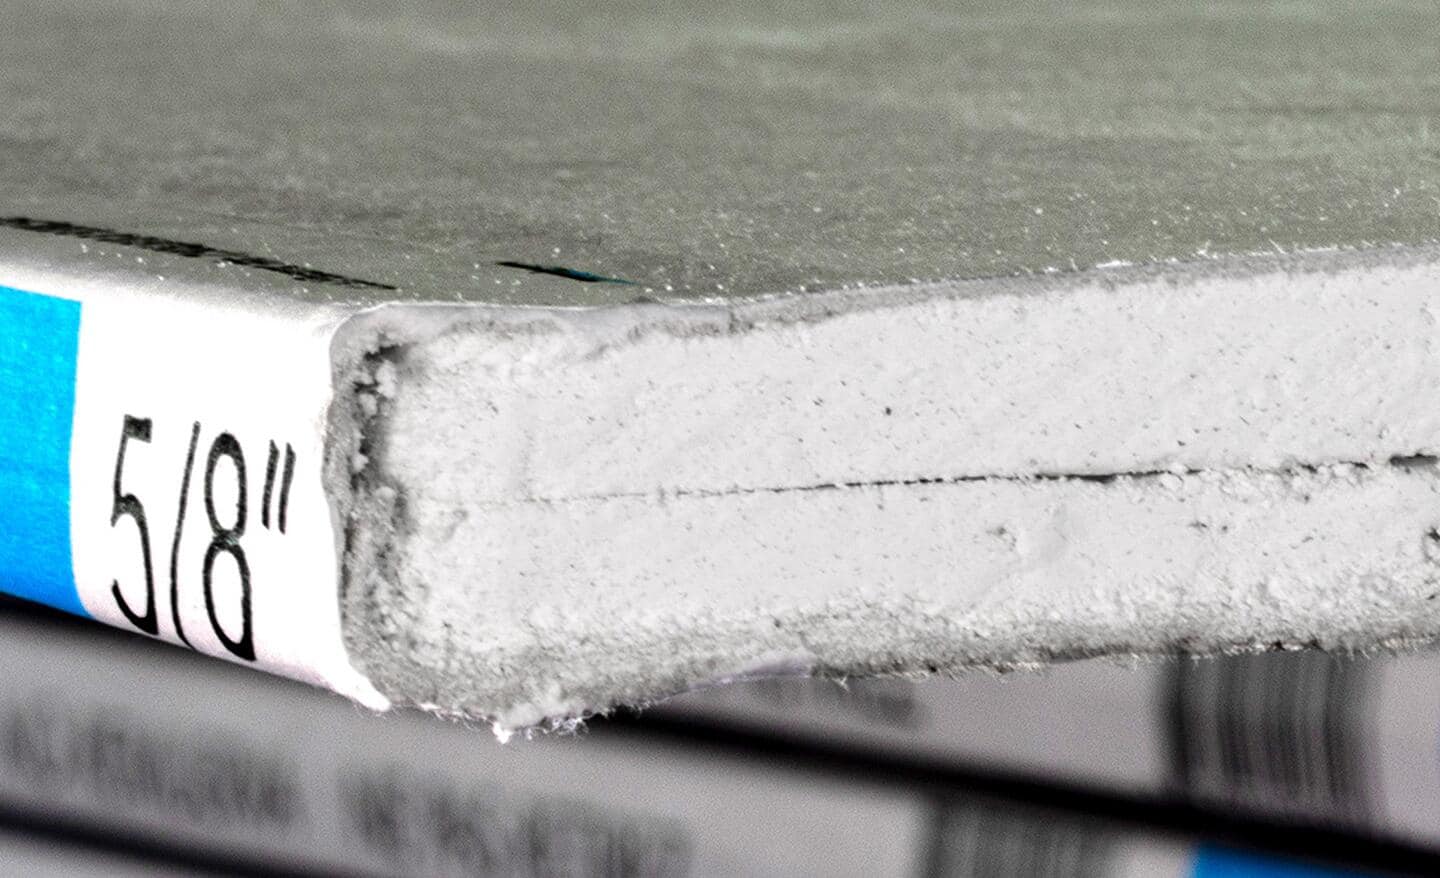 A close-up image of a drywall sheet labeled 5/8 inches thick.